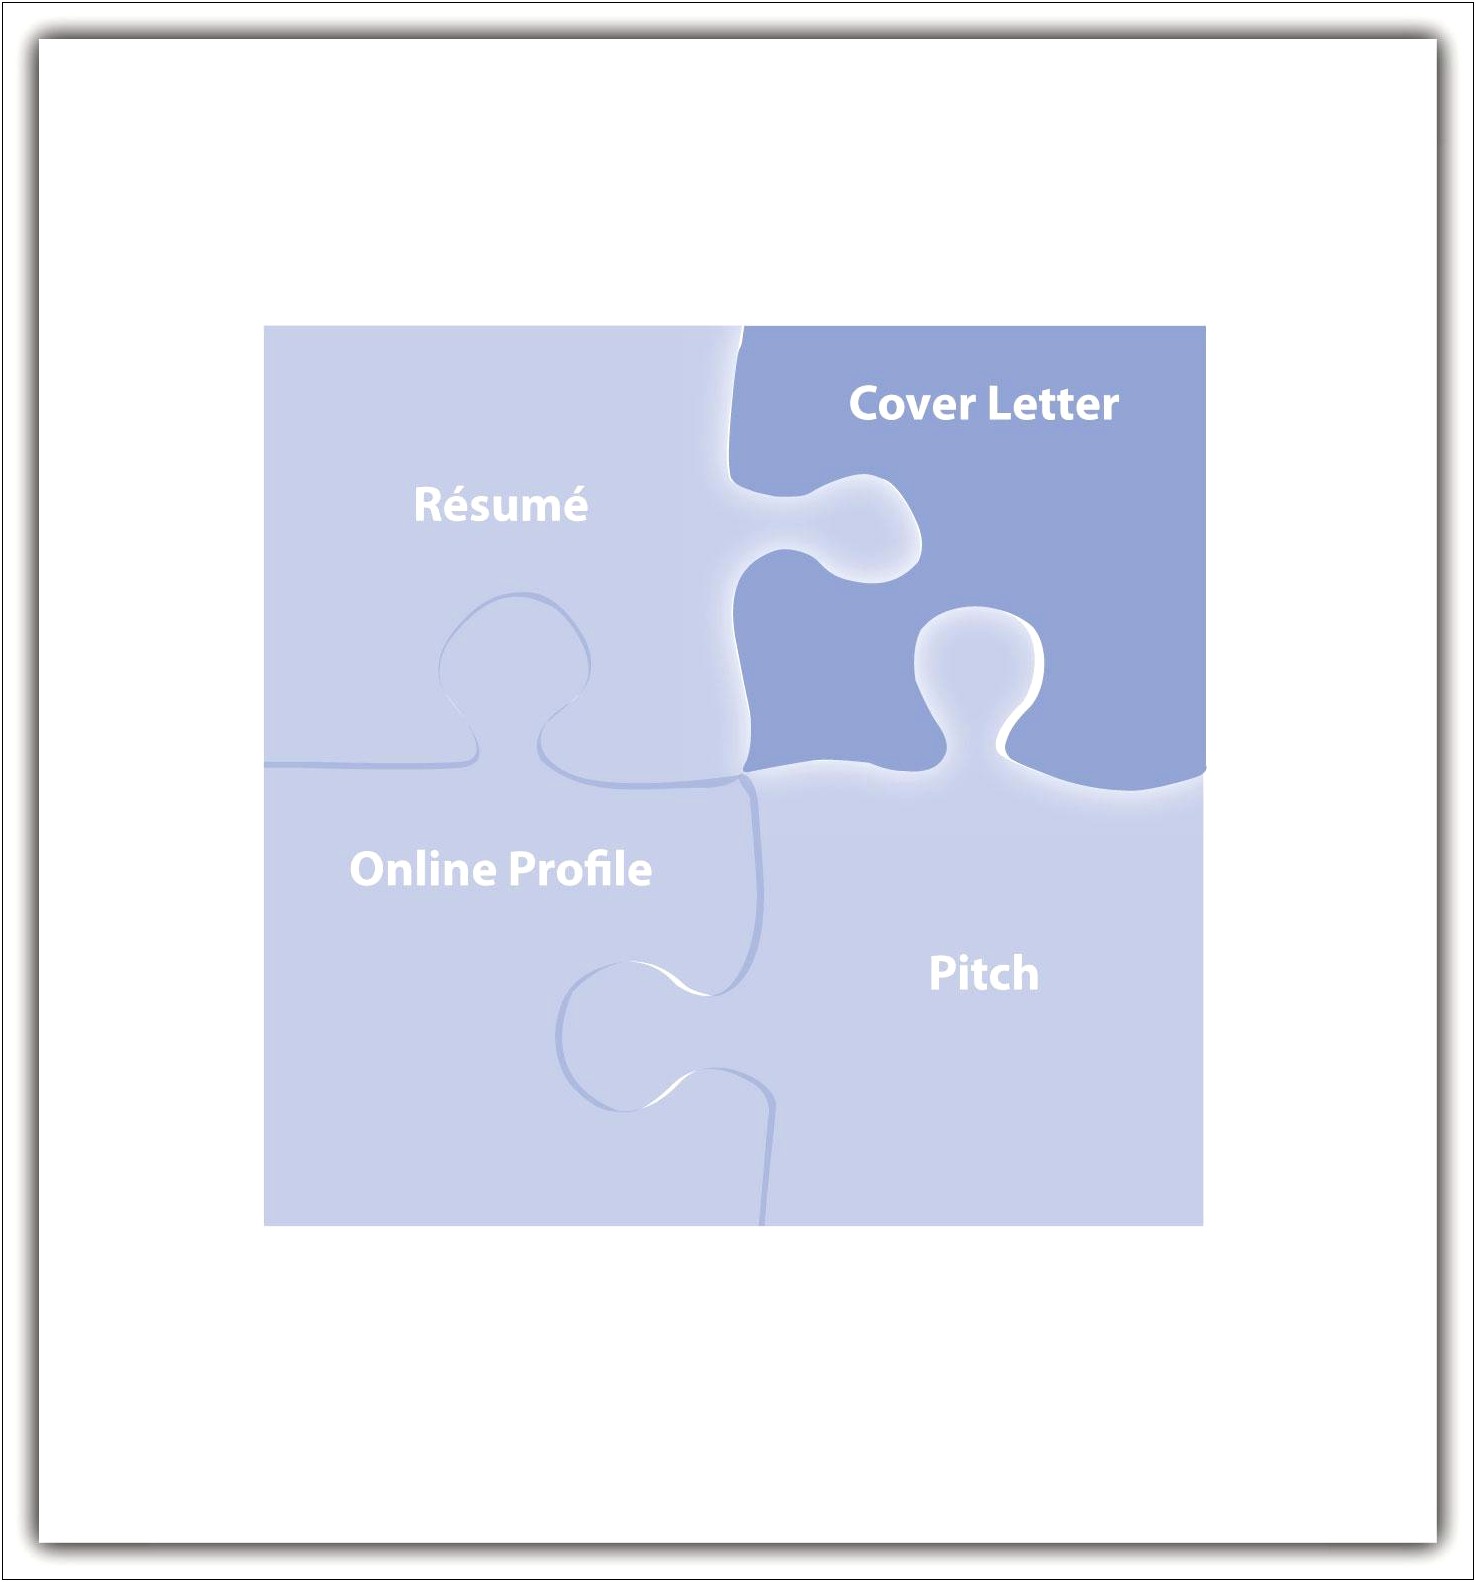 Resume And Cover Letter Peer Review